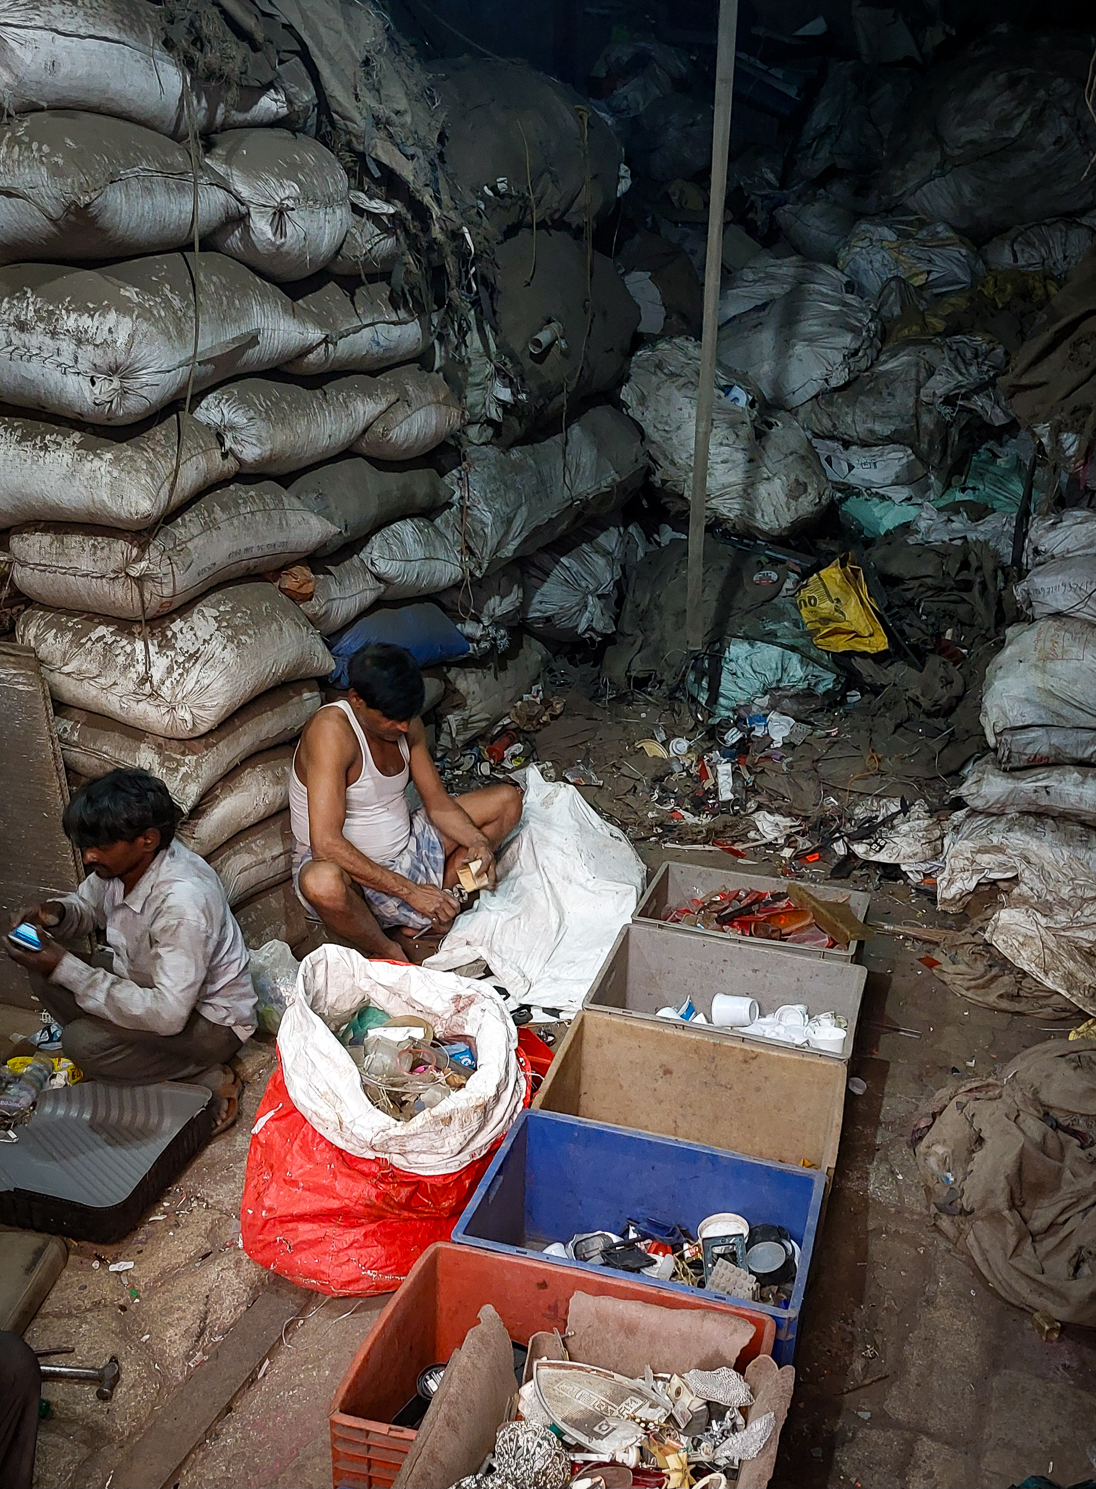 <span  class="uc_style_uc_tiles_grid_image_elementor_uc_items_attribute_title" style="color:#ffffff;">Dharavi is a real recycling and production place, ...very busy (work conditions are low, as you can see)</span>